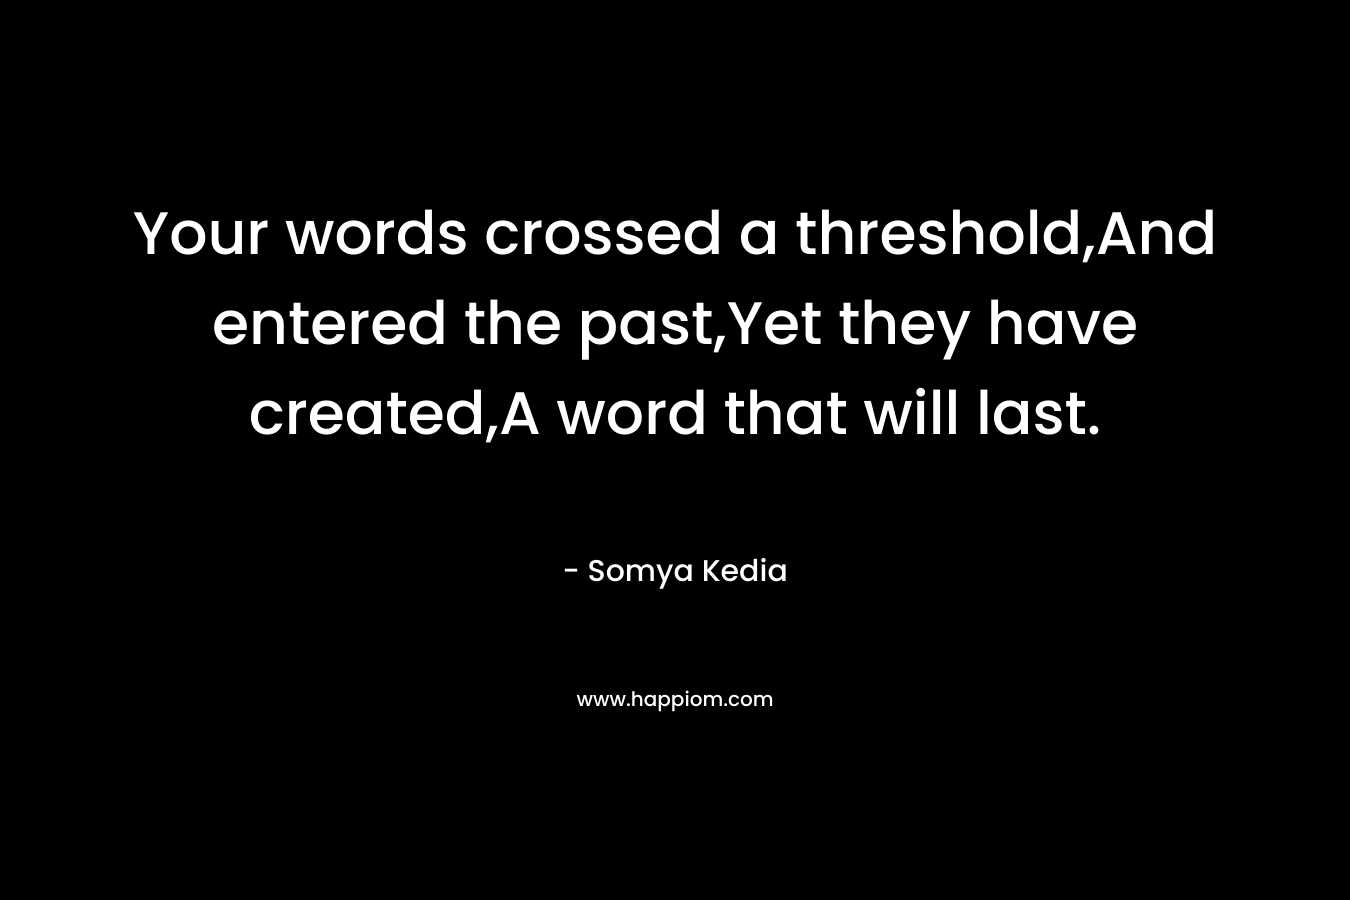 Your words crossed a threshold,And entered the past,Yet they have created,A word that will last. – Somya Kedia